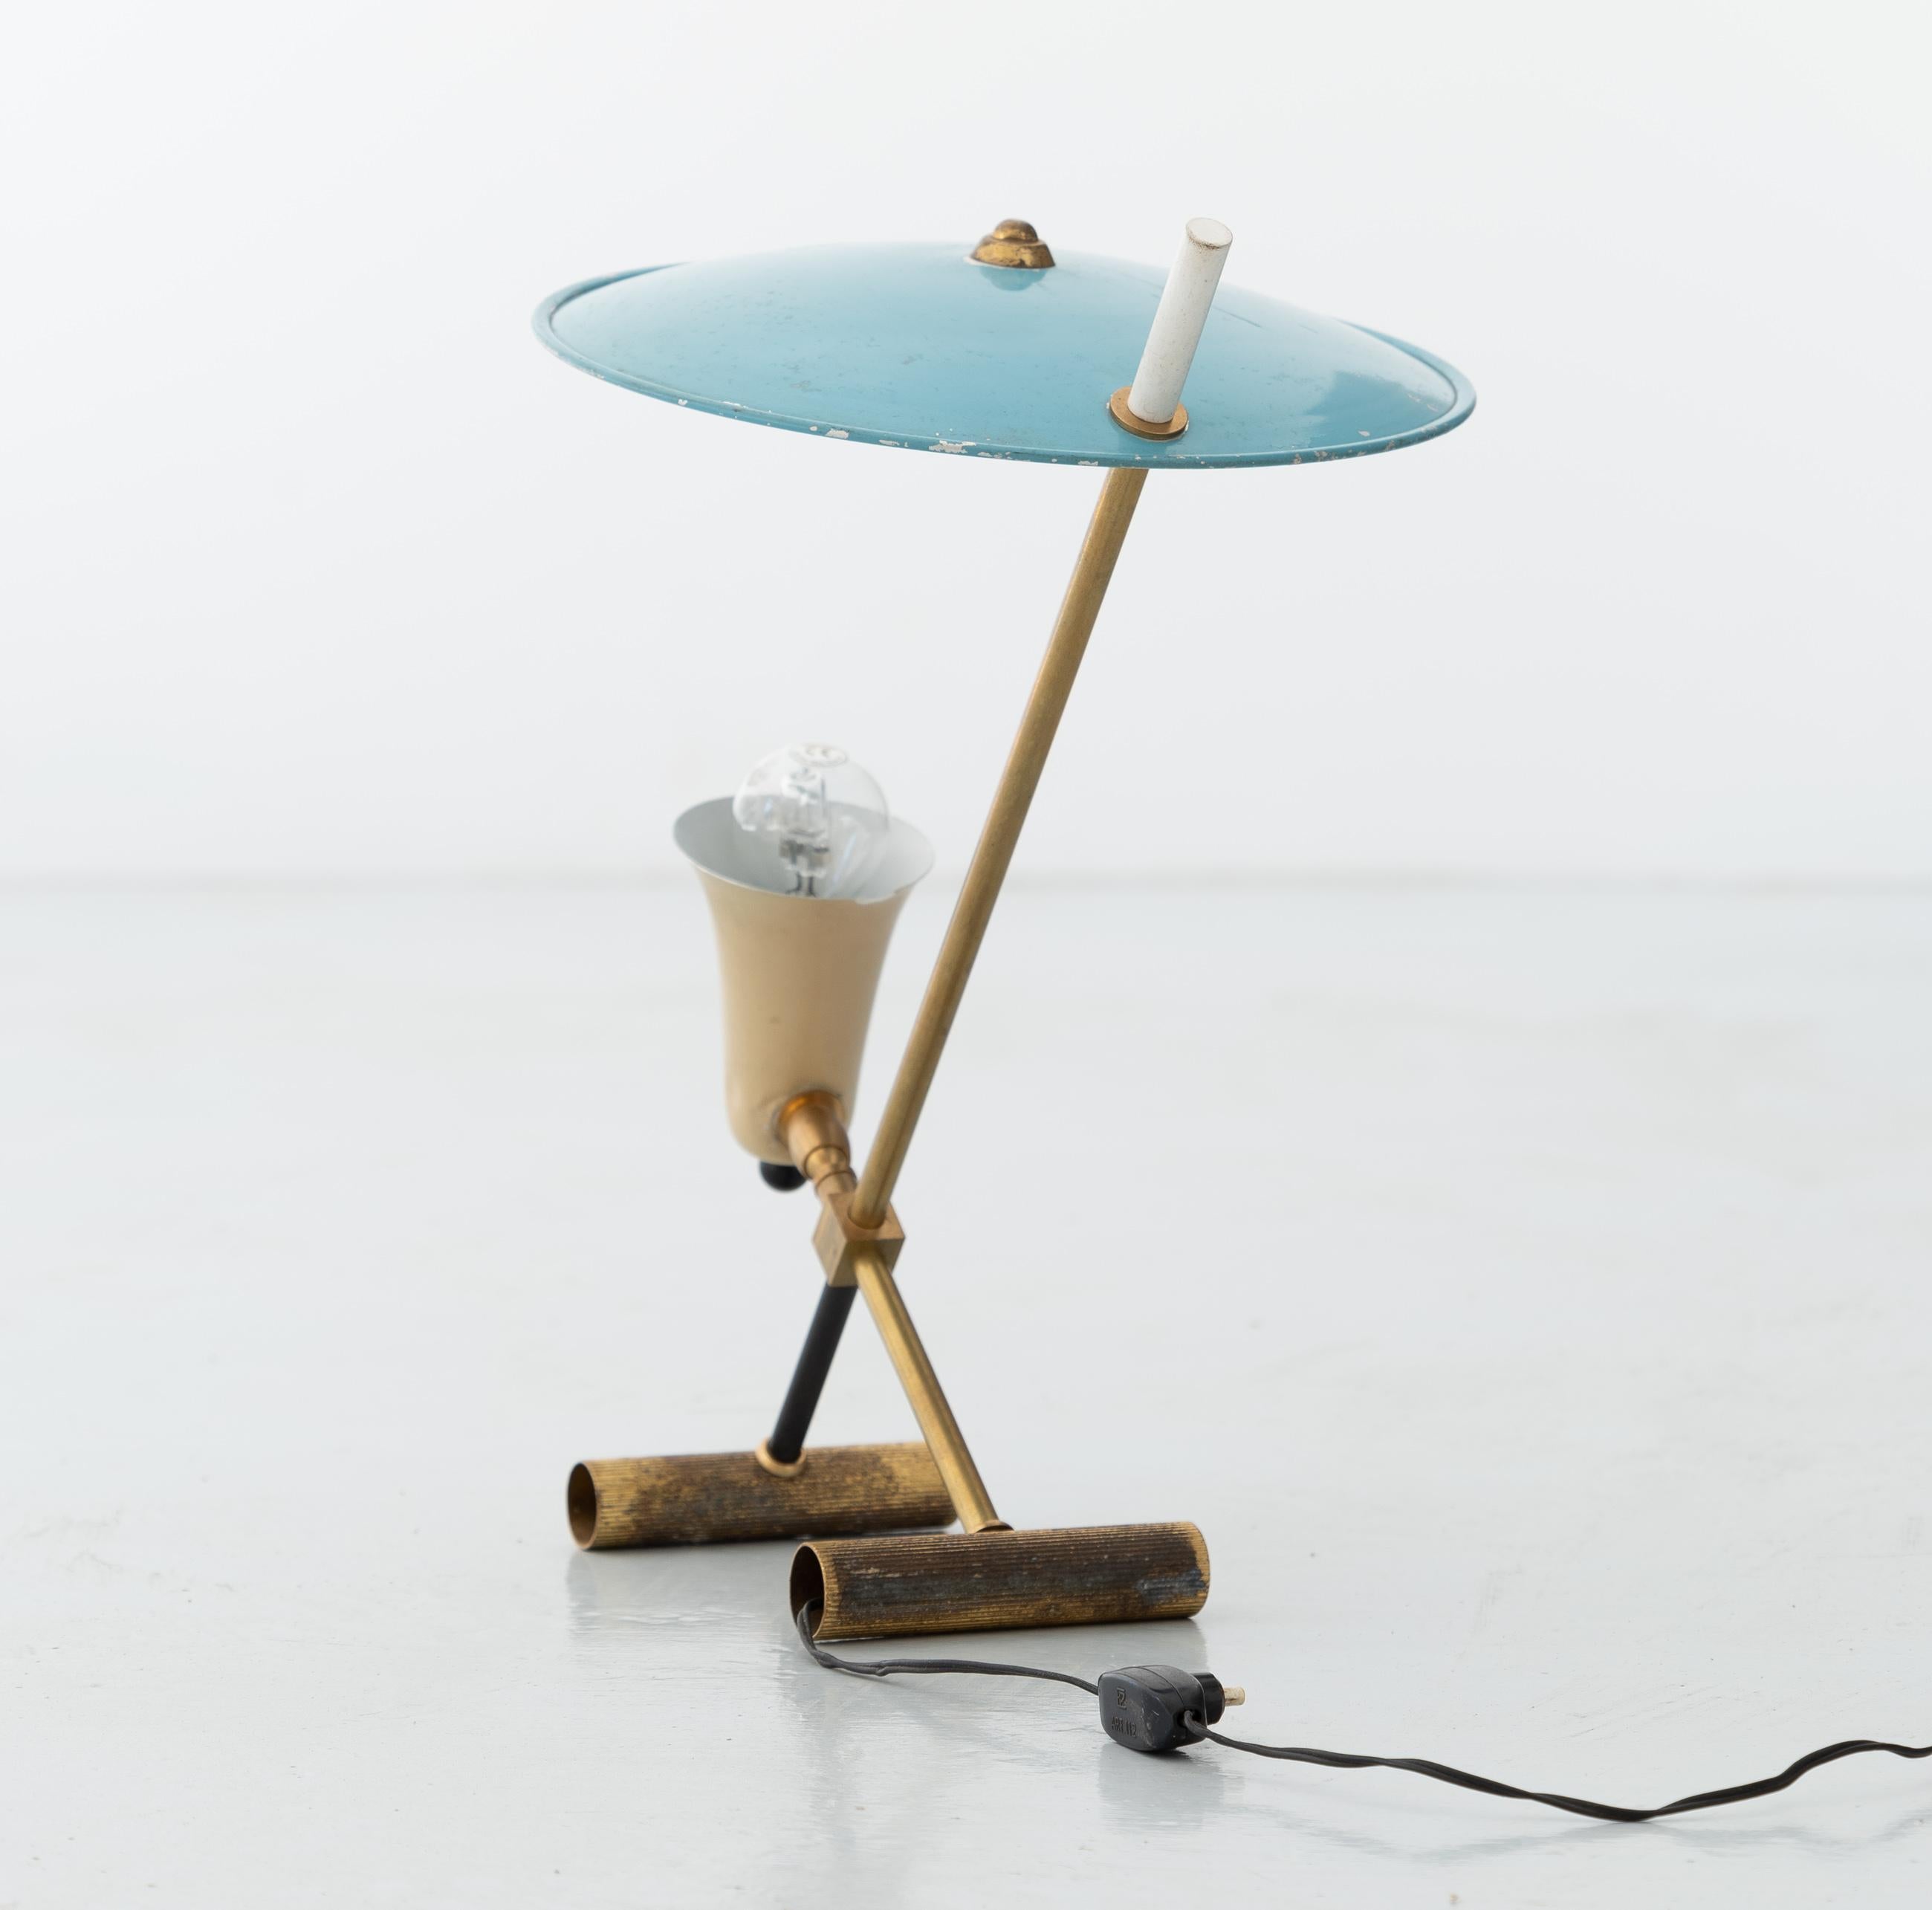 Table lamp, Italy, 1950s, brass, blue and cream enamelled aluminum.

An interesting lamp with a refined design. Original condition, patination and oxidation of the brass parts, small lacks of paint on the lampshade.